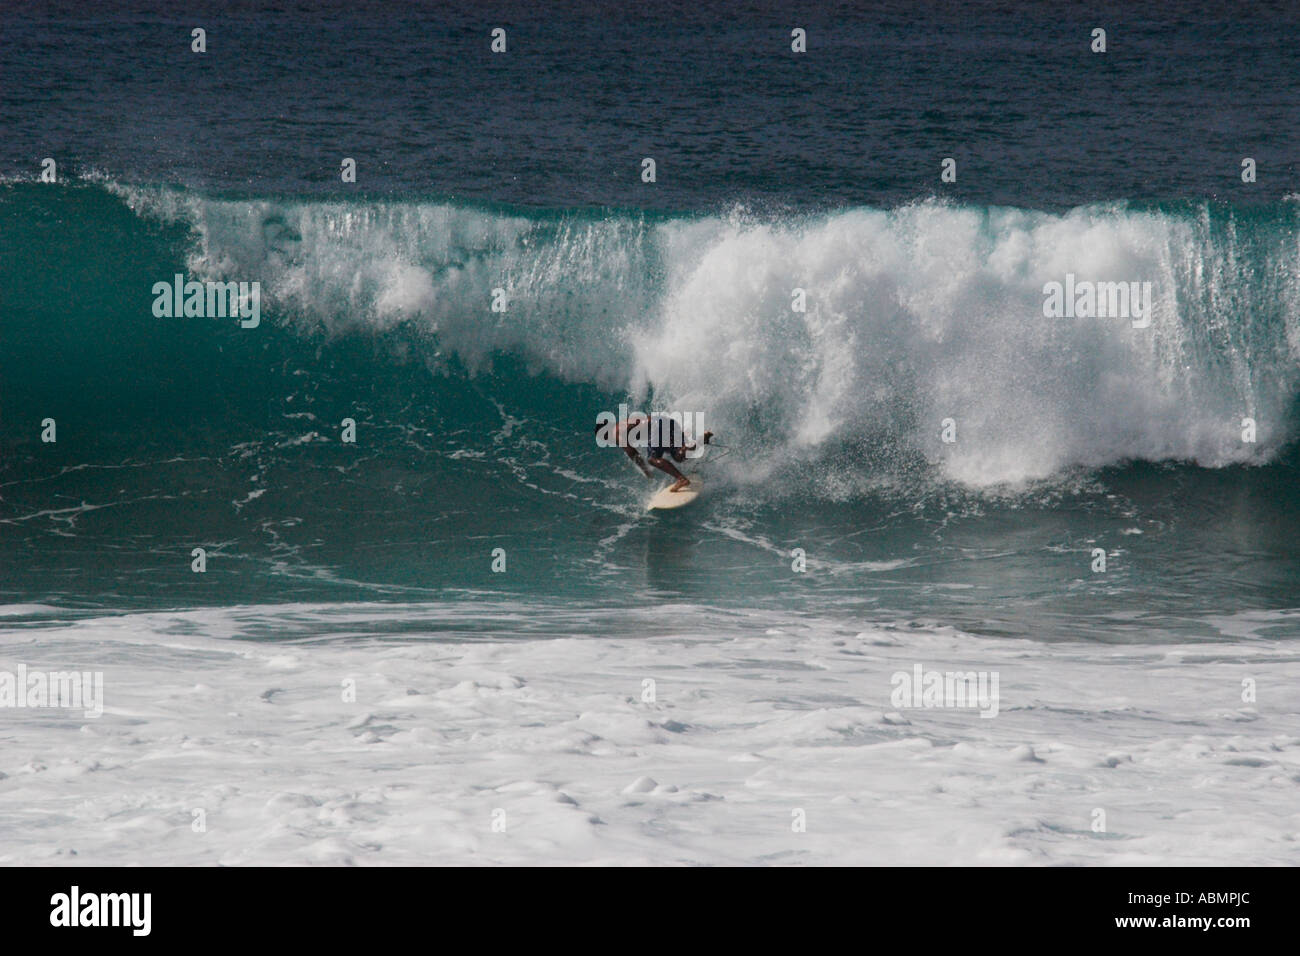 Surfer riding a wave in Pipeline beach world s surfing mecca North Shore Oahu Hawaii Pacific Stock Photo